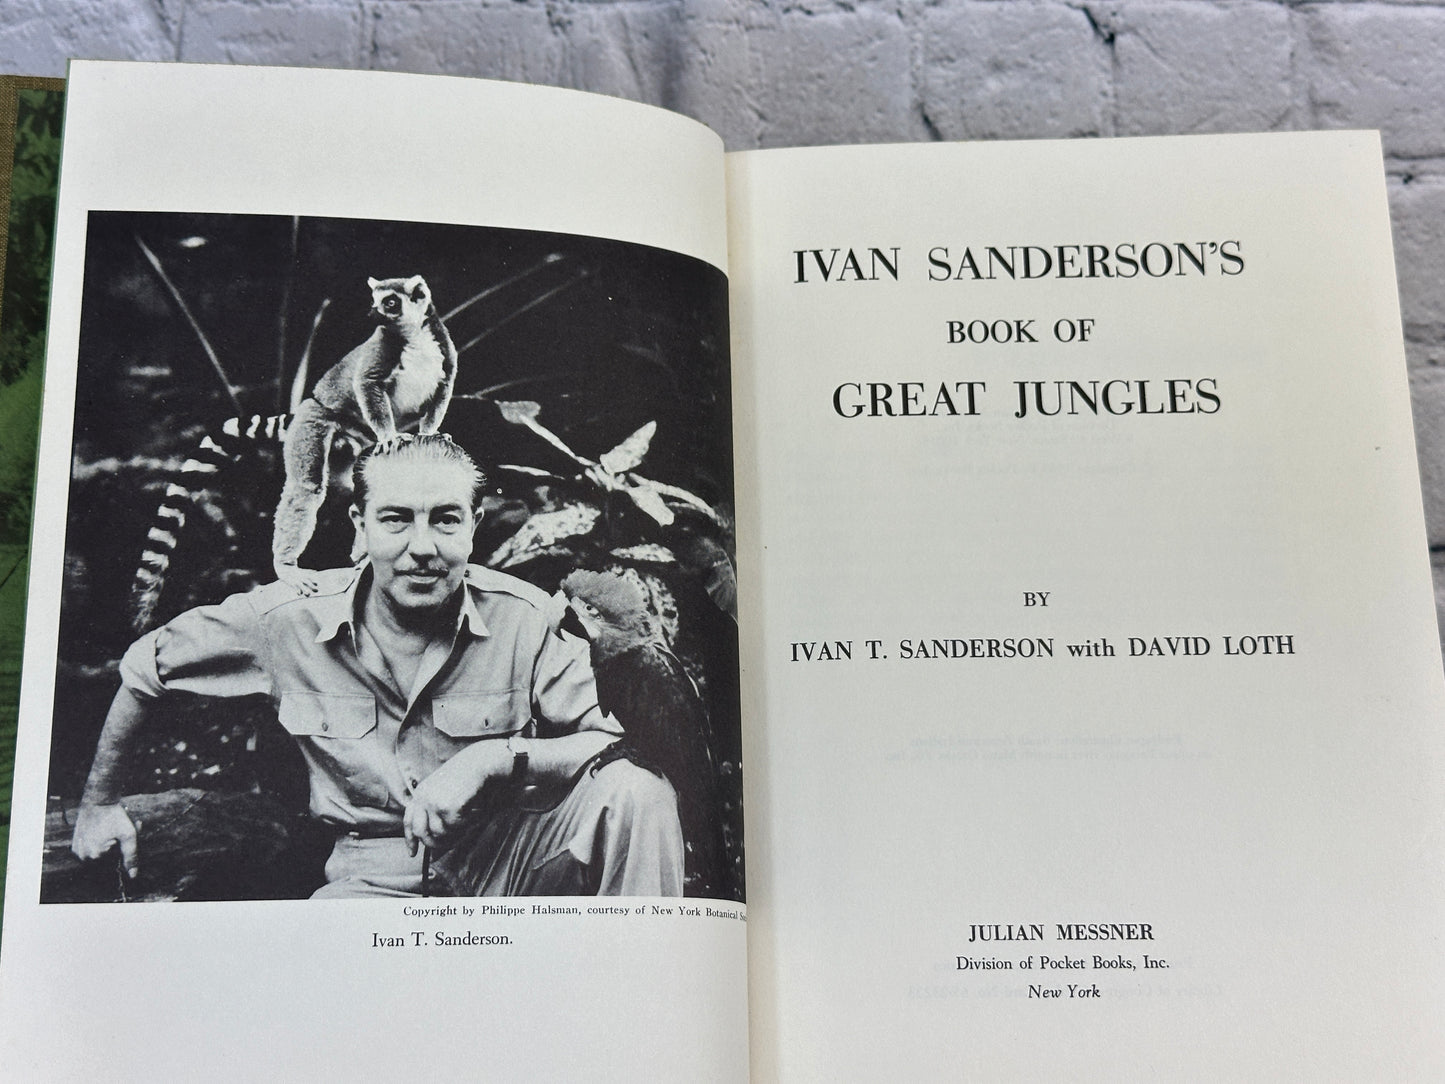 Book of Great Jungles by Ivan Sanderson [1965]